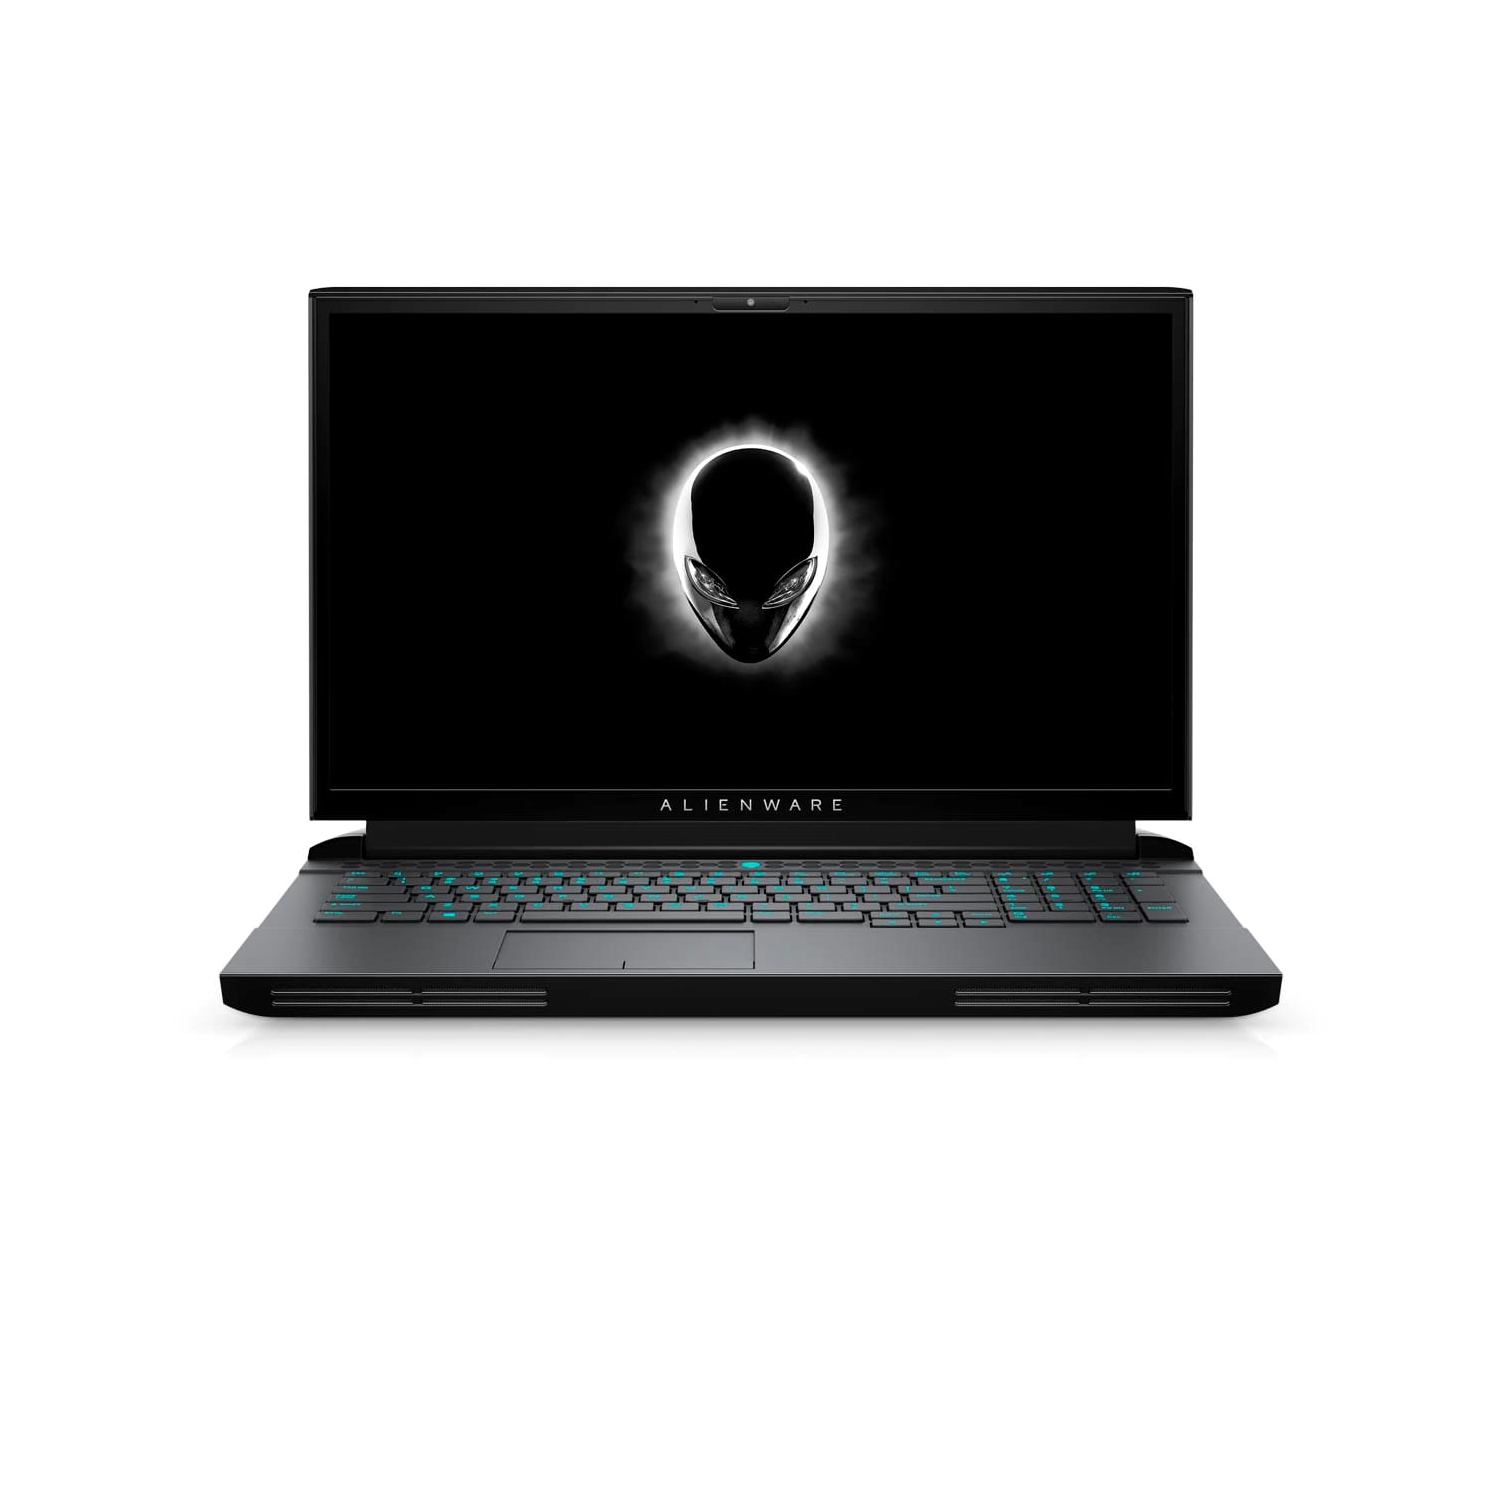 Refurbished (Excellent) - Dell Alienware 17 51m R2 Gaming Laptop (2020), 17.3" FHD, Core i7, 2TB SSD, 64GB RAM, 2070 Super, 8 Cores @ 4.8 GHz, 10th Gen CPU Certified